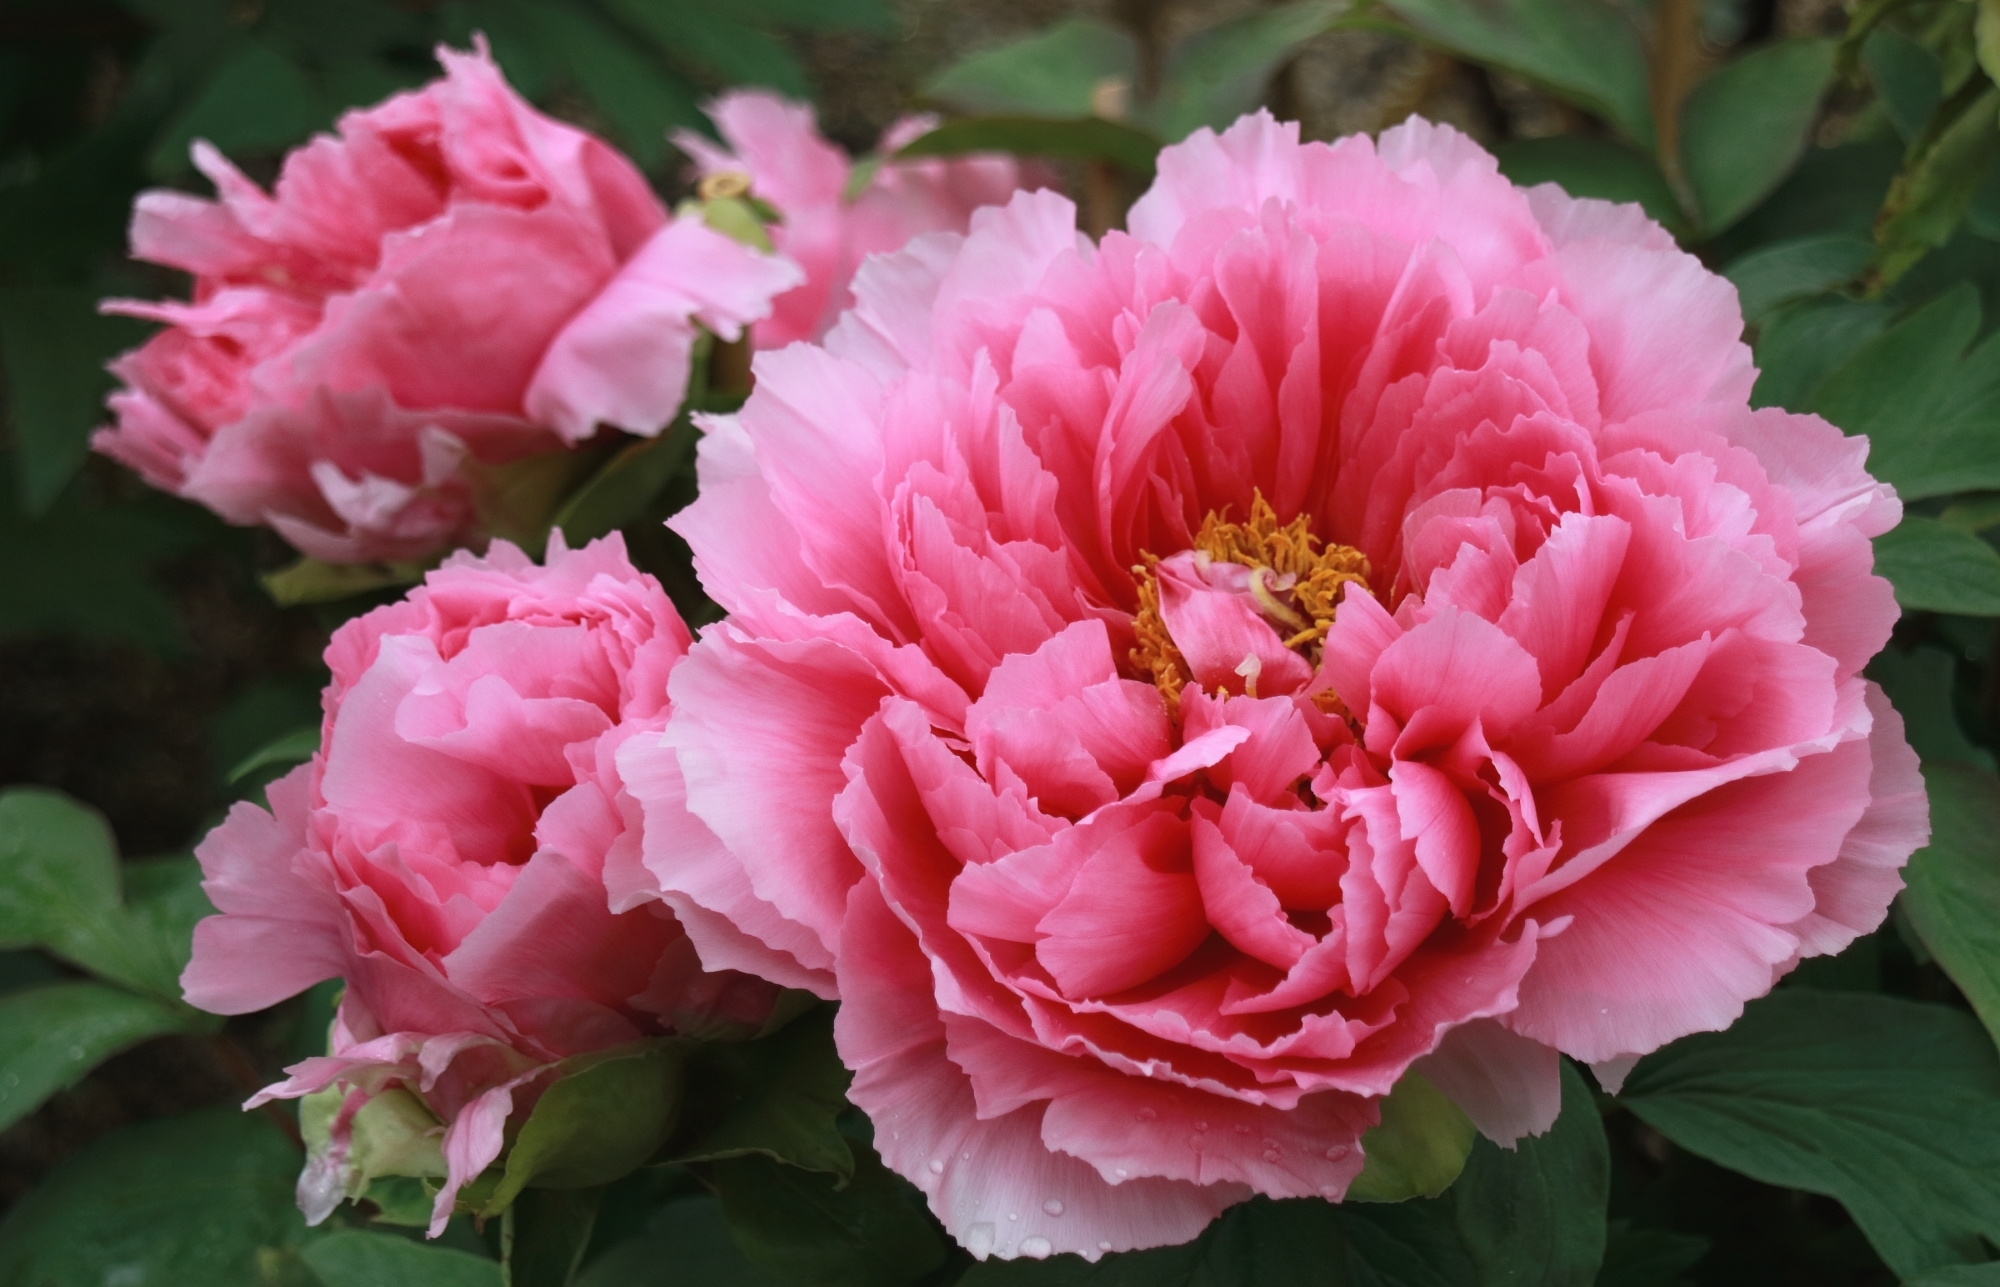 earth, peony, close up, flower, nature, pink flower, flowers